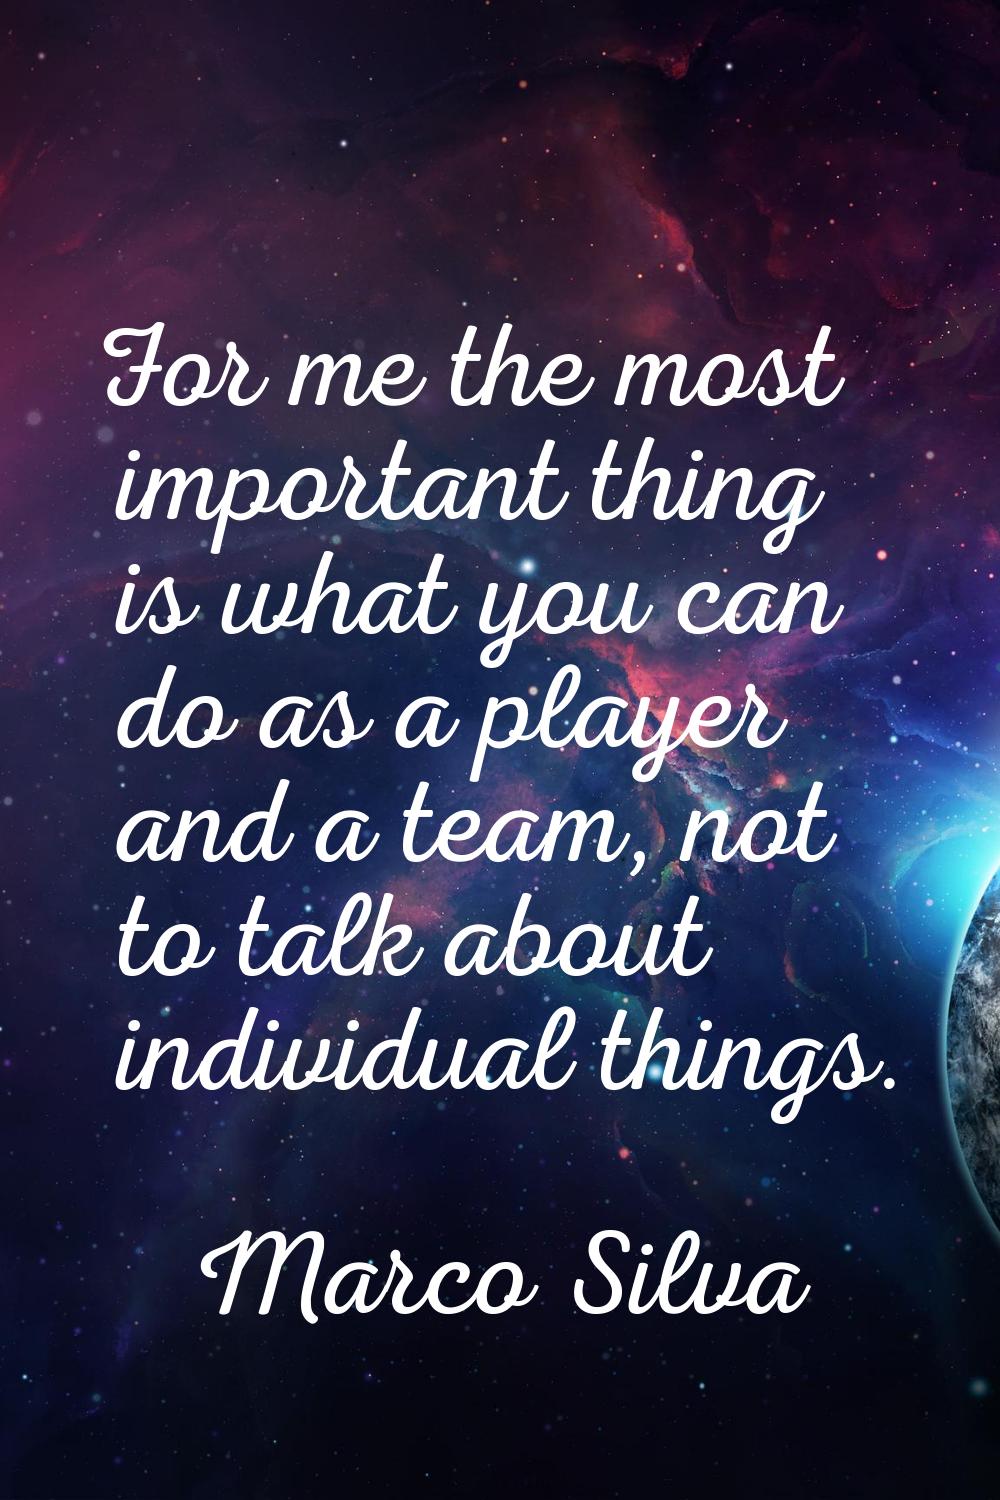 For me the most important thing is what you can do as a player and a team, not to talk about indivi